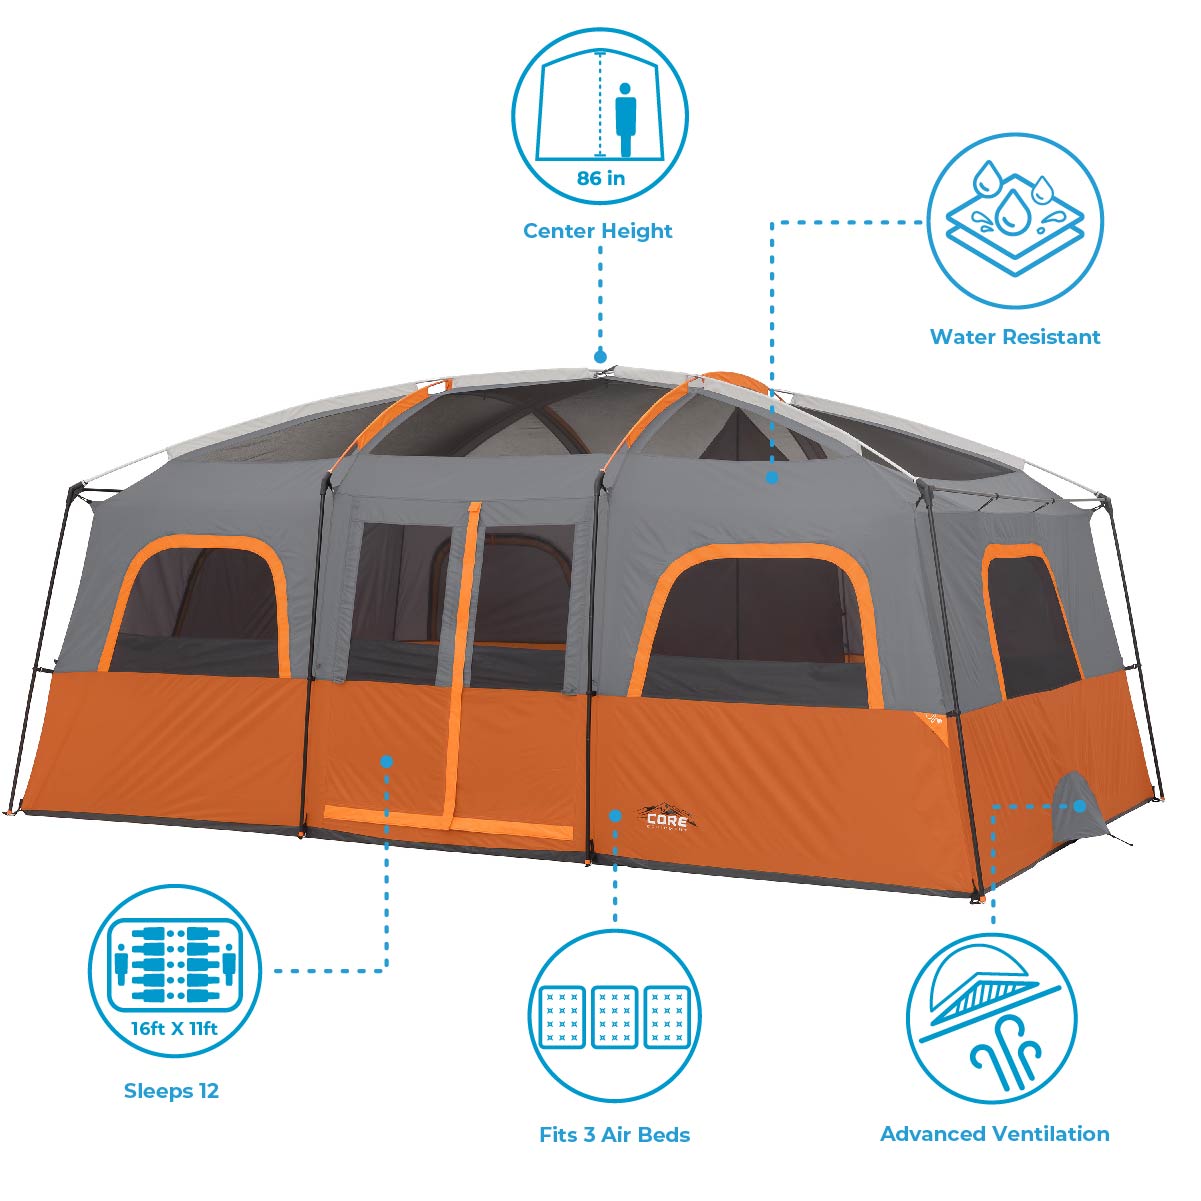 12 Person Straight Wall Cabin Tent 16' x 11